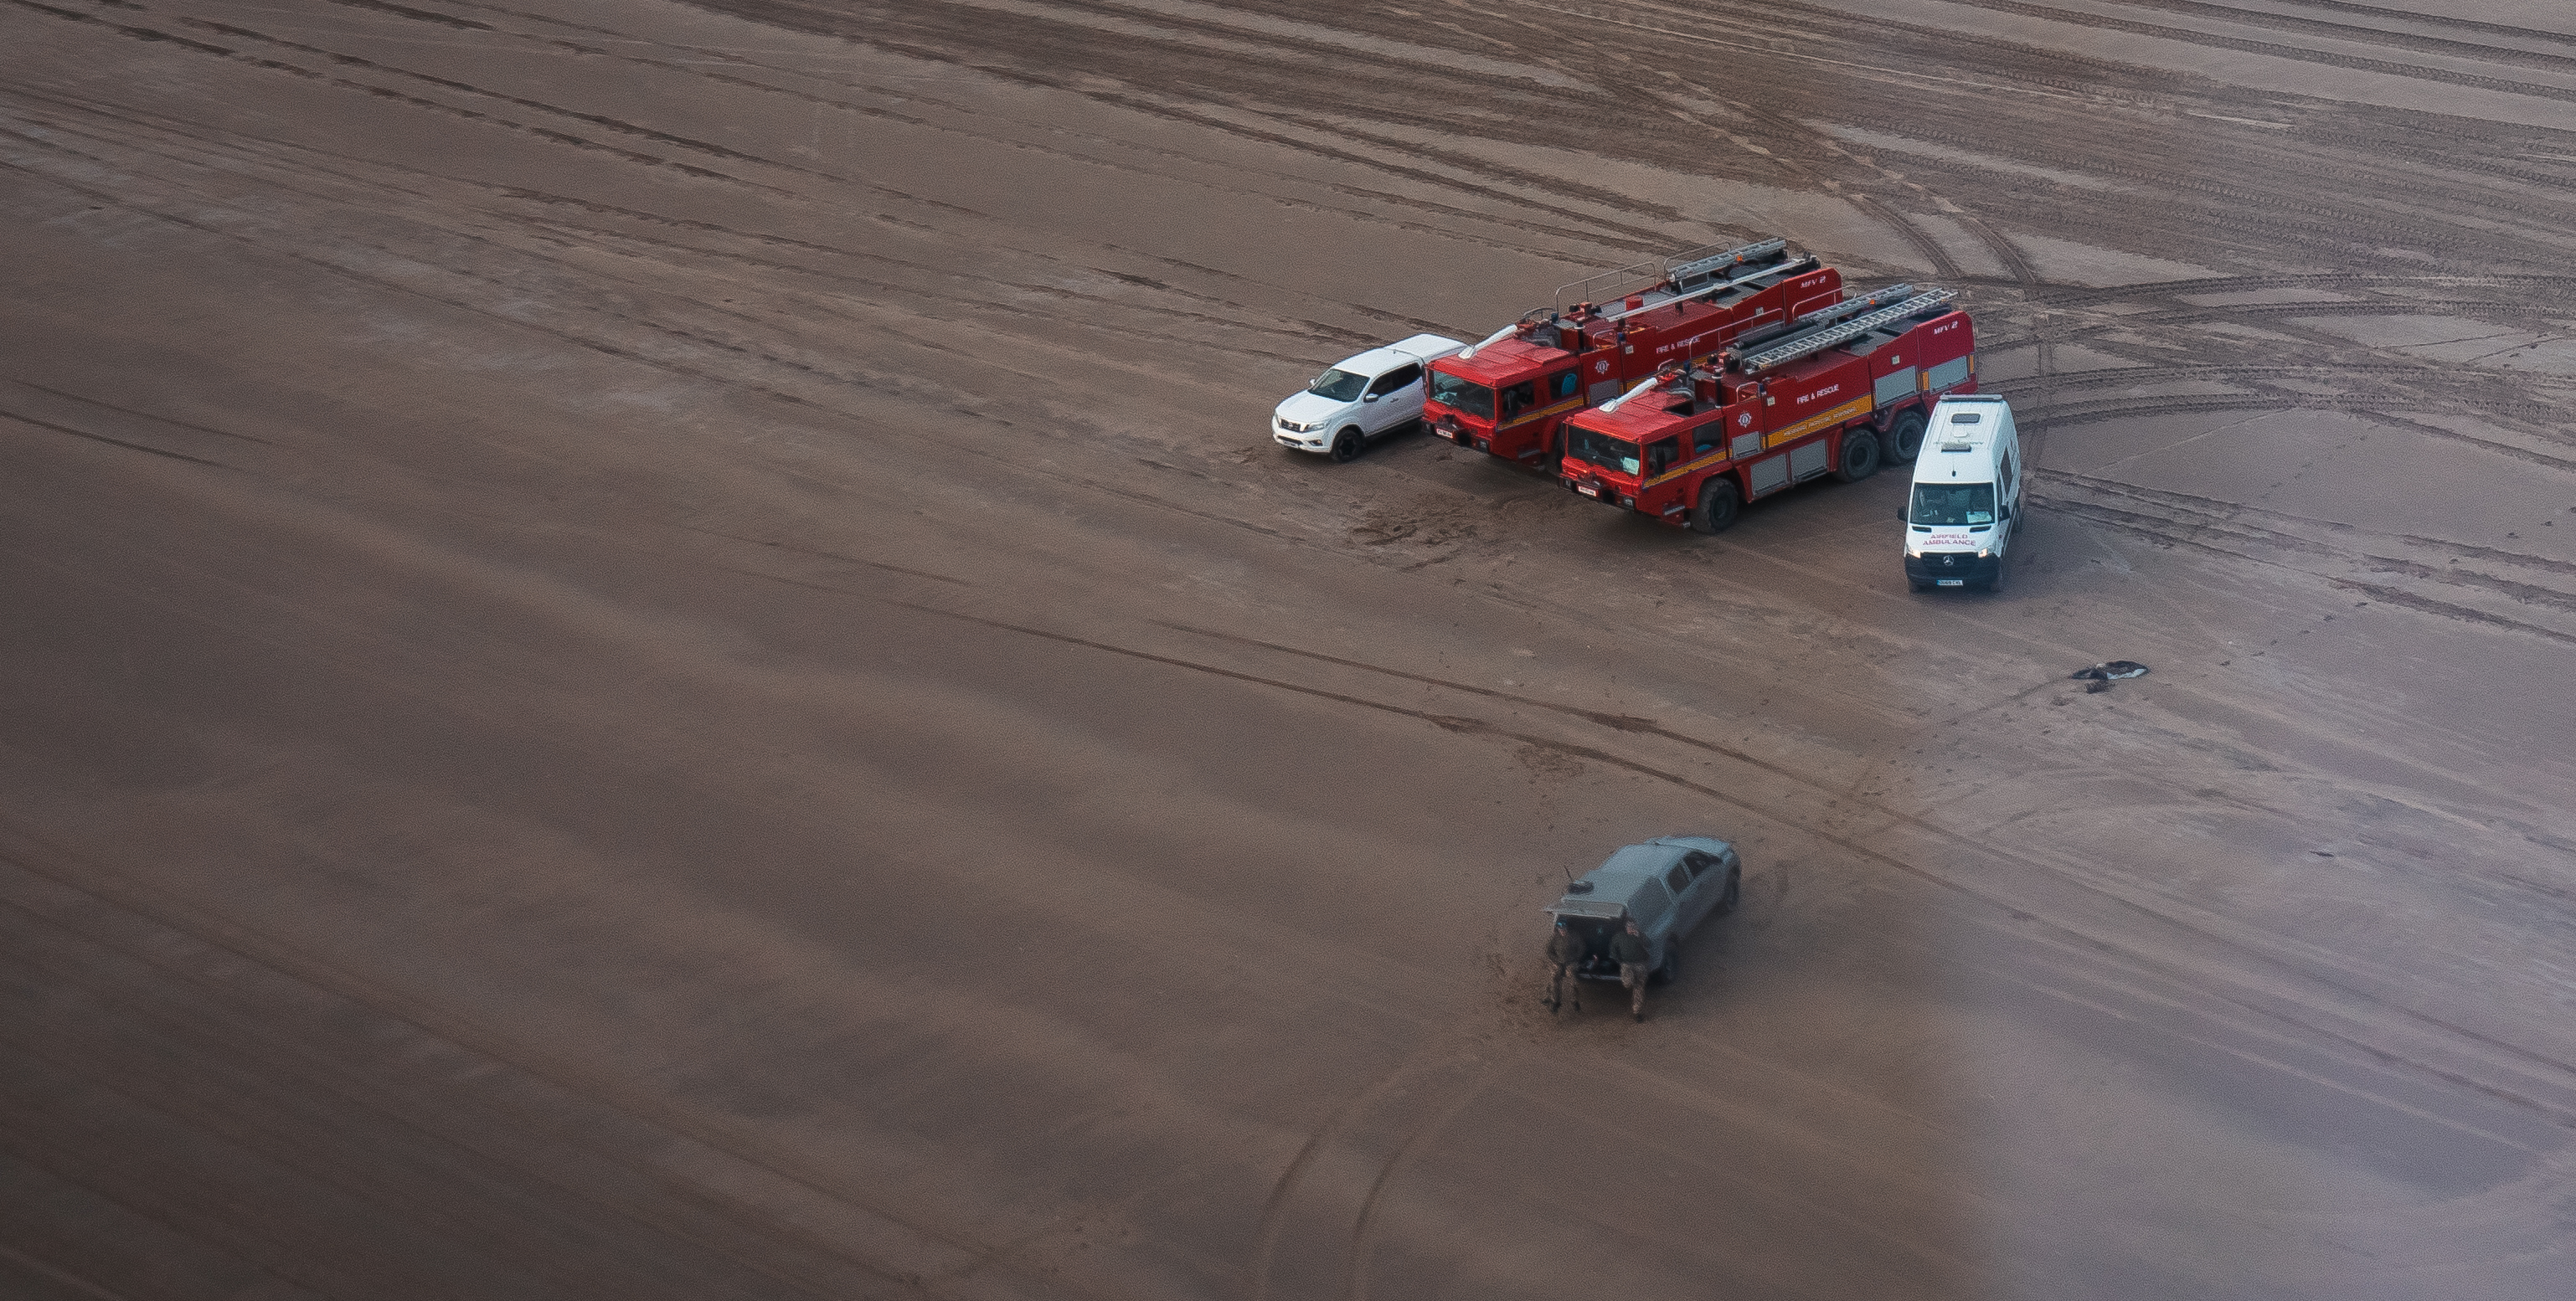 Image shows Firefighter vehicles on the beach.